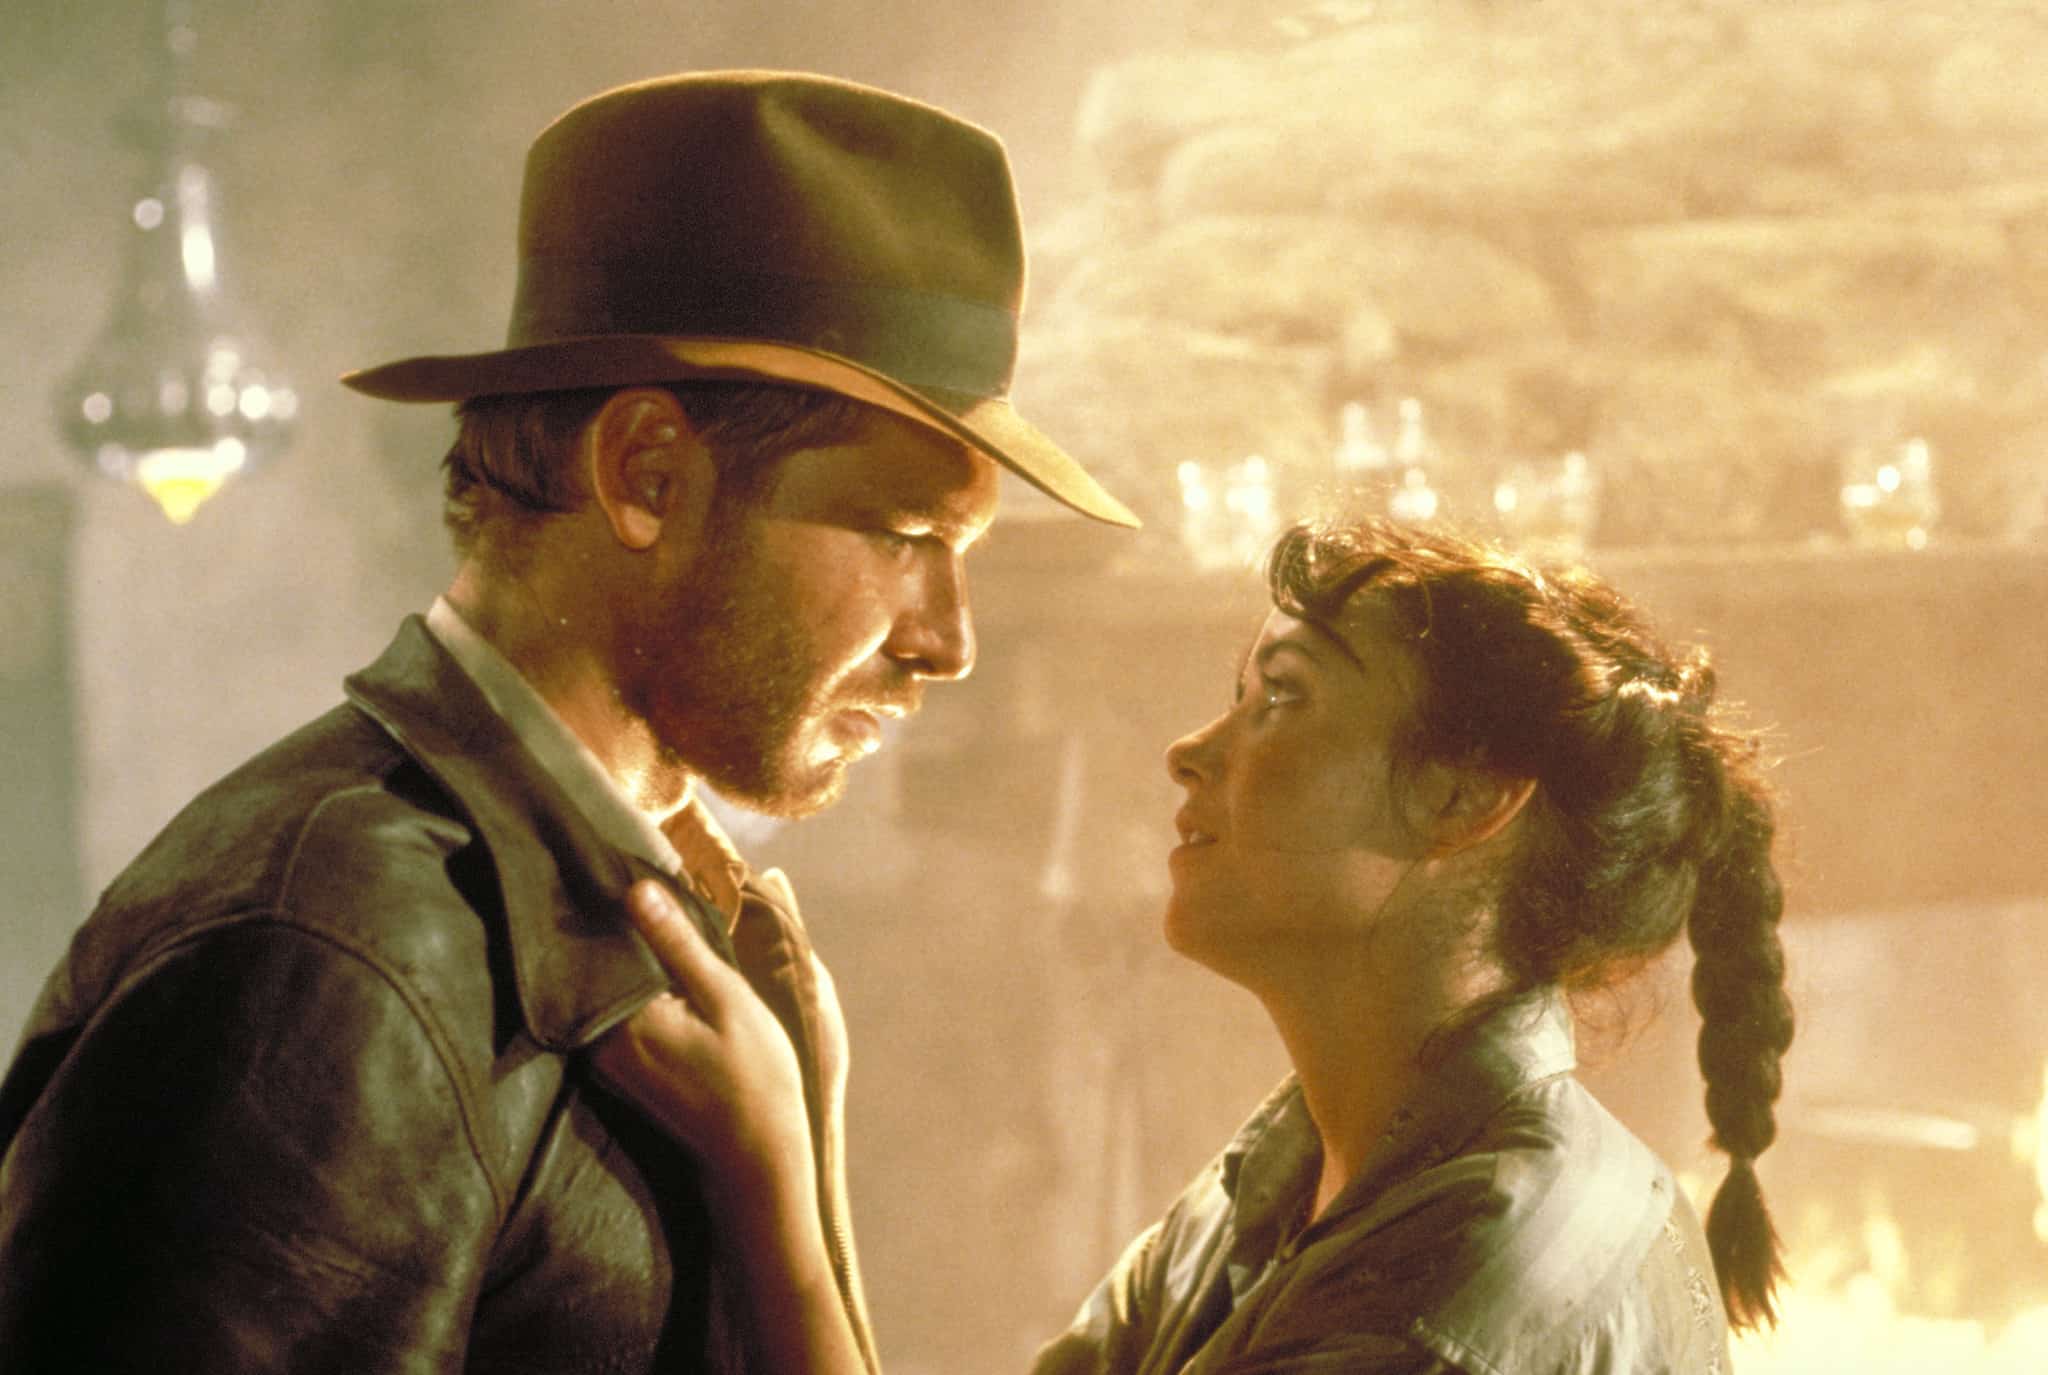 Harrison Ford and Karen Allen in this image from Lucasfilm